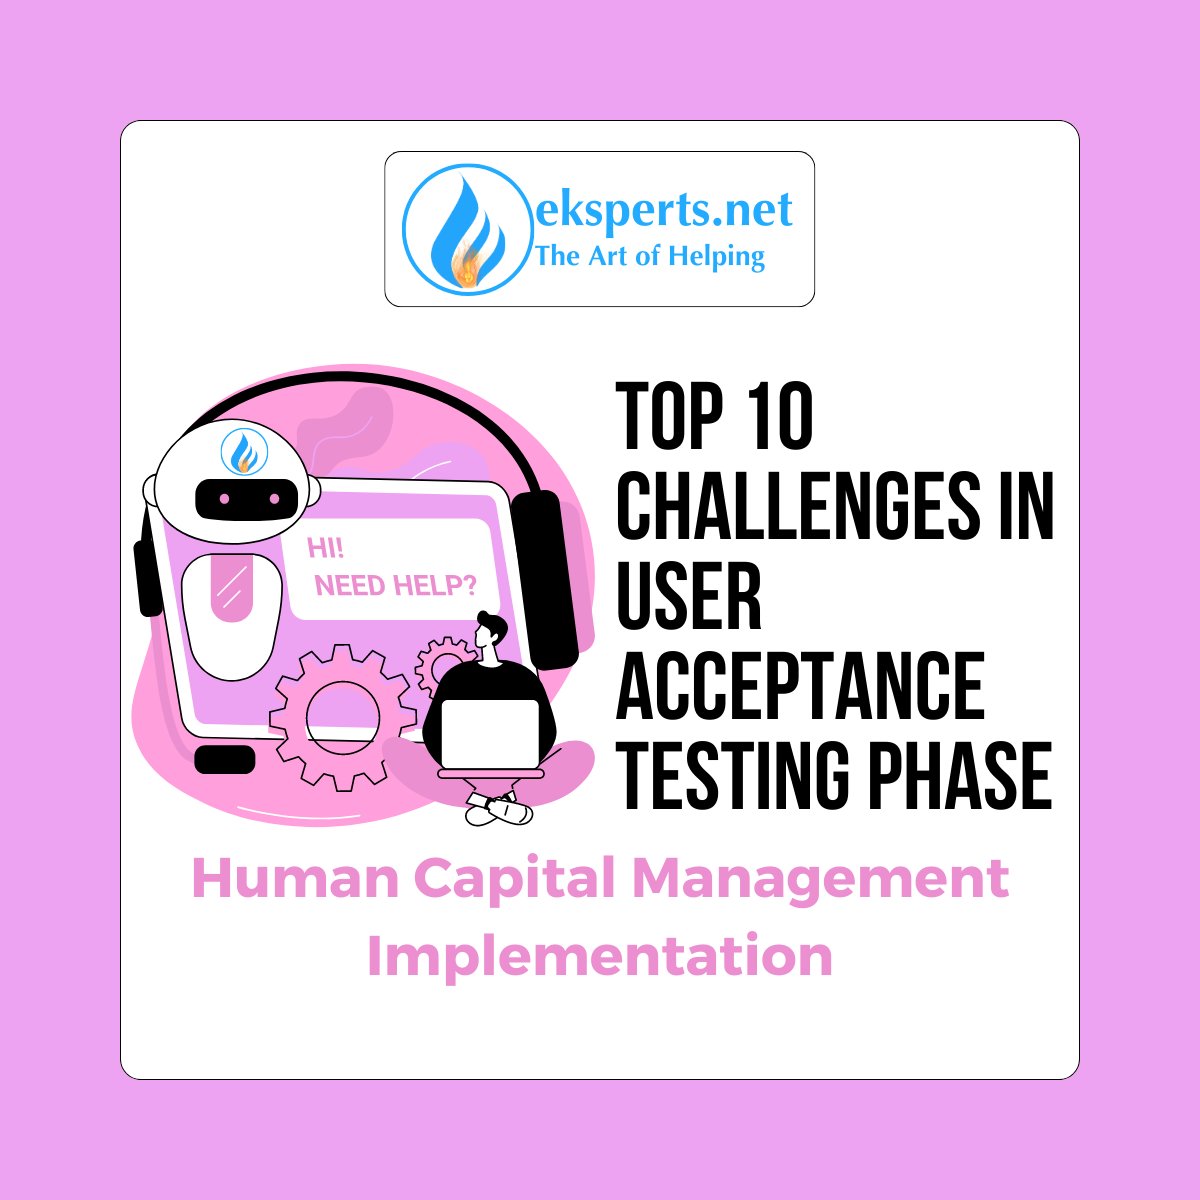 Top 10 challenges in User acceptance Testing Phase in Human Capital Management Implementation.

eksperts.net/top-10-challen…

#hcm #humancapitalmanagement #UAT #testing #useracceptancetesting #implementation #consulting #challenges #problemsolving